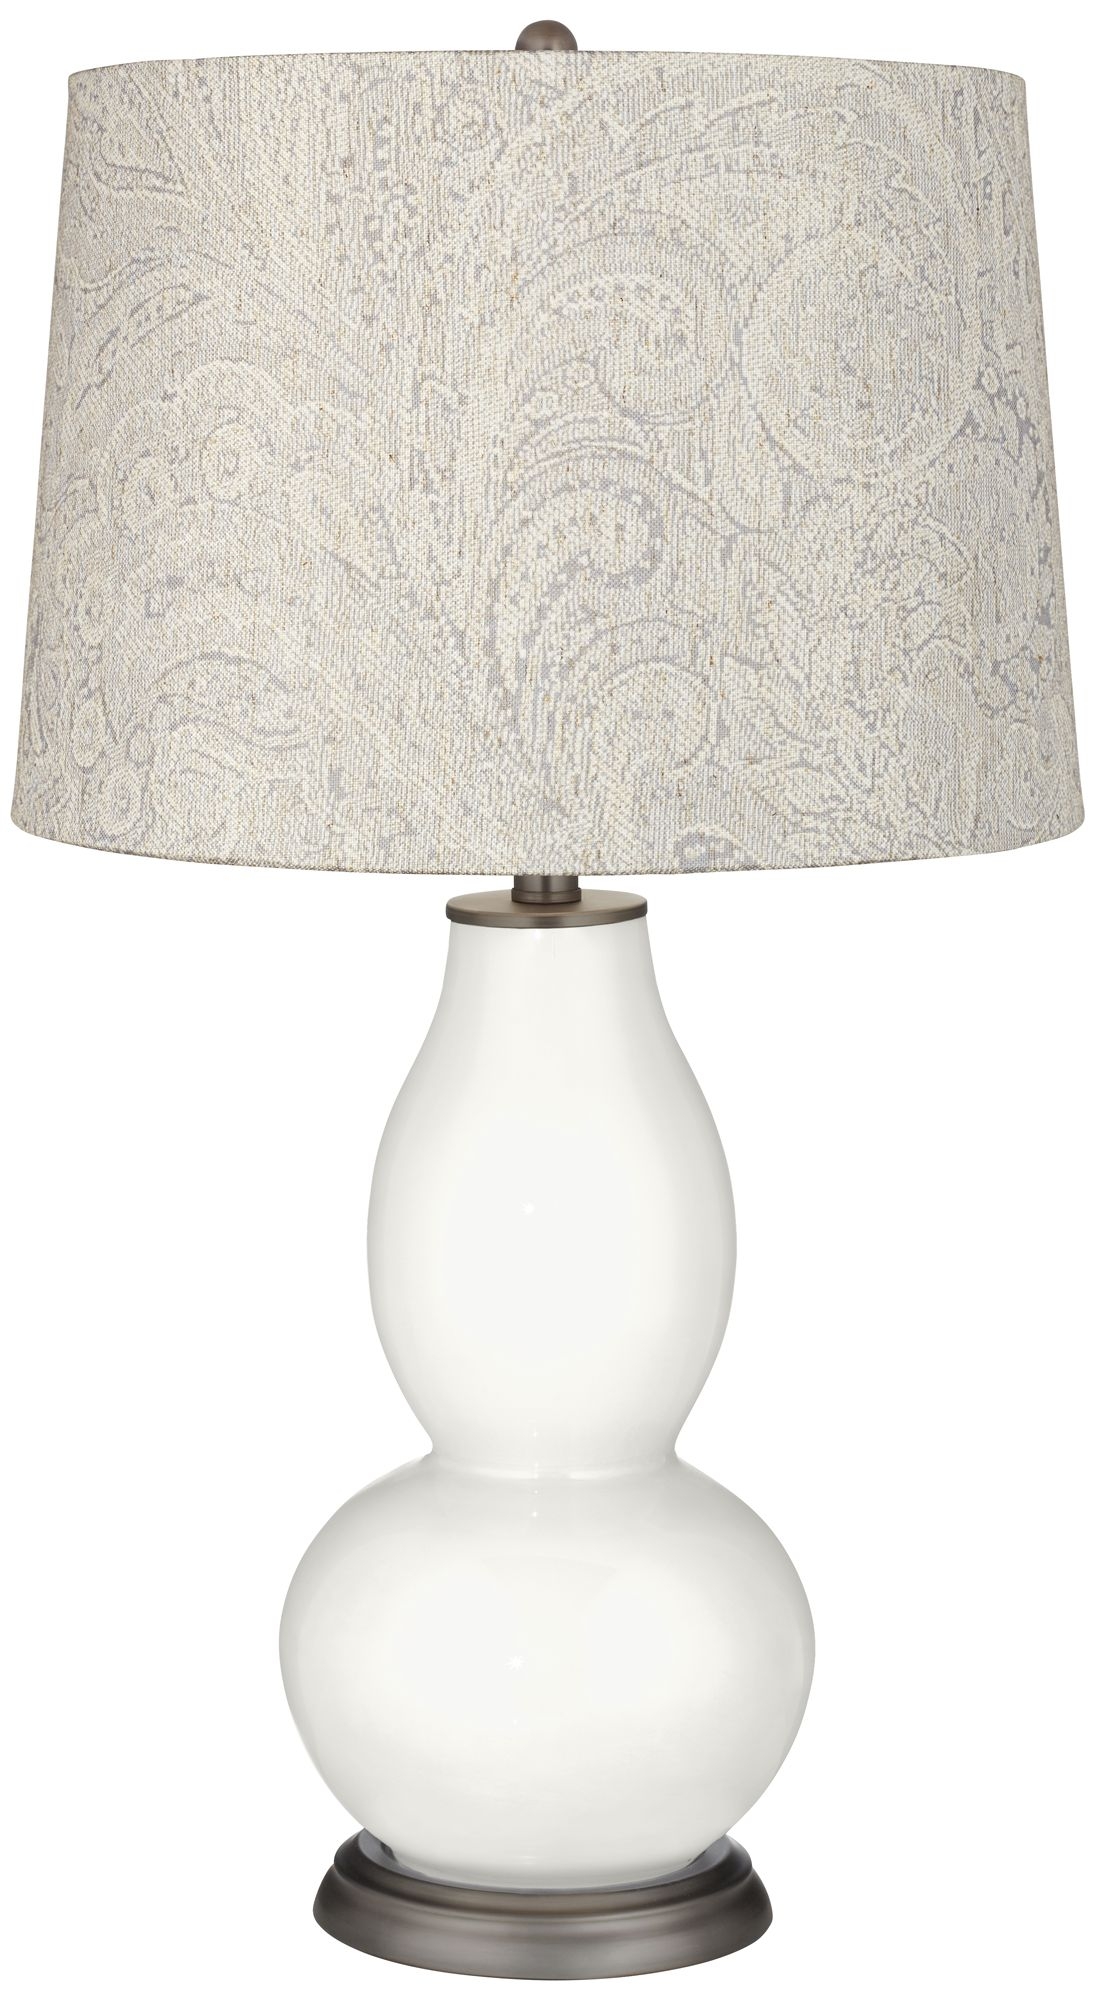 Winter White Digital Lace Shade Double Gourd Table Lamp - Image 0